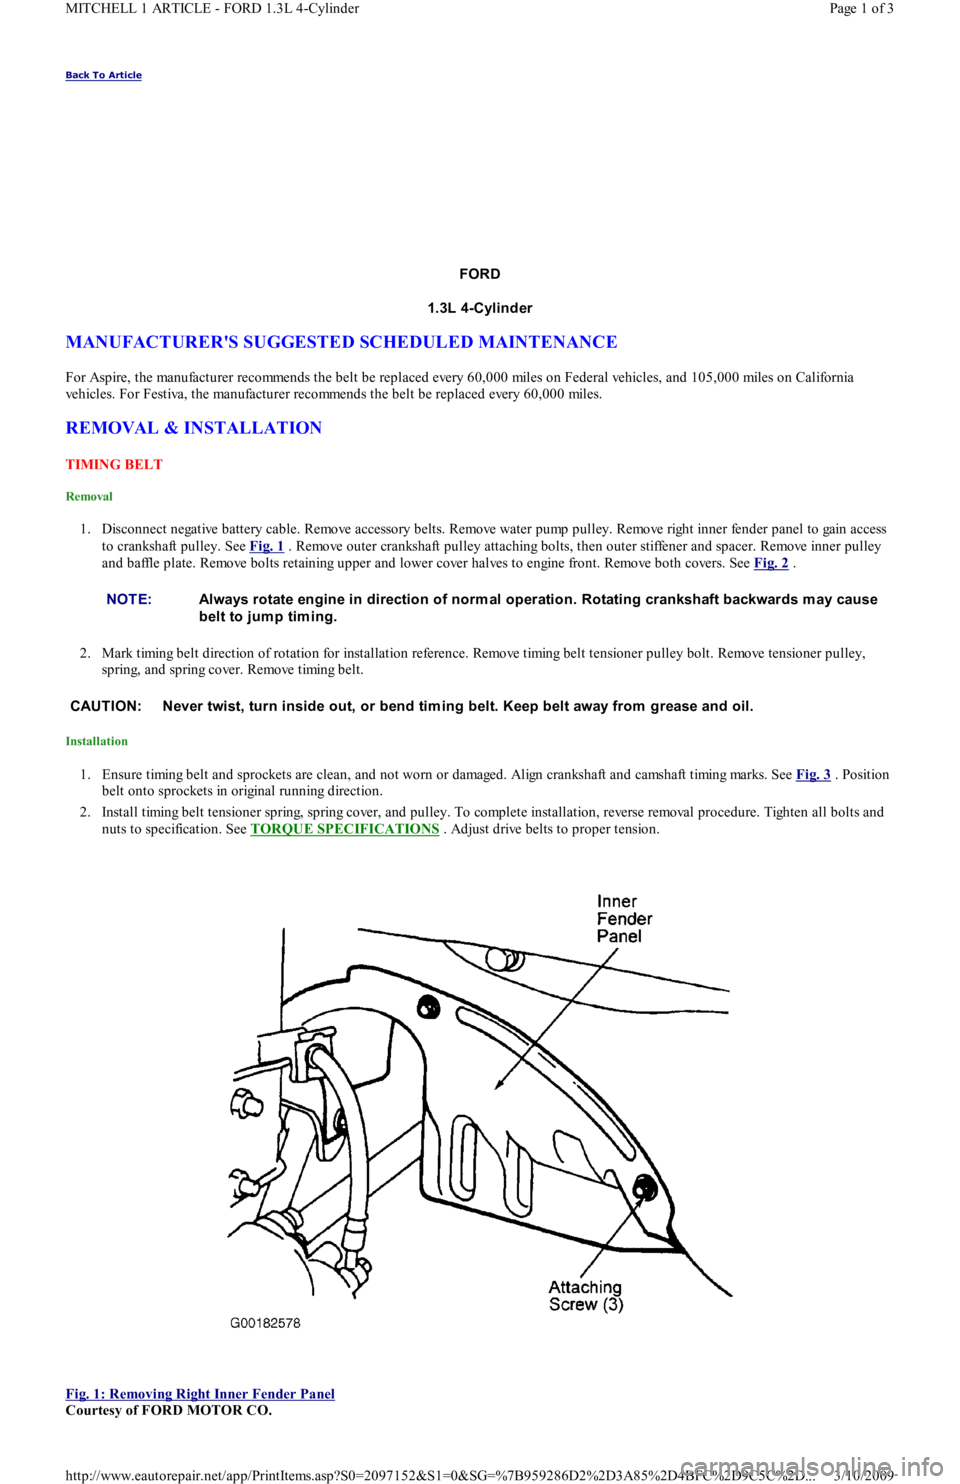 FORD FESTIVA 1991  Service Manual Back To Article 
FORD
1.3L 4-Cylinder 
MANUFACTURERS SUGGESTED SCHEDULED MAINTENANCE 
For Aspire, the manufacturer recommends the belt be replaced every 60,000 miles on Federal vehicles, and 105,000 